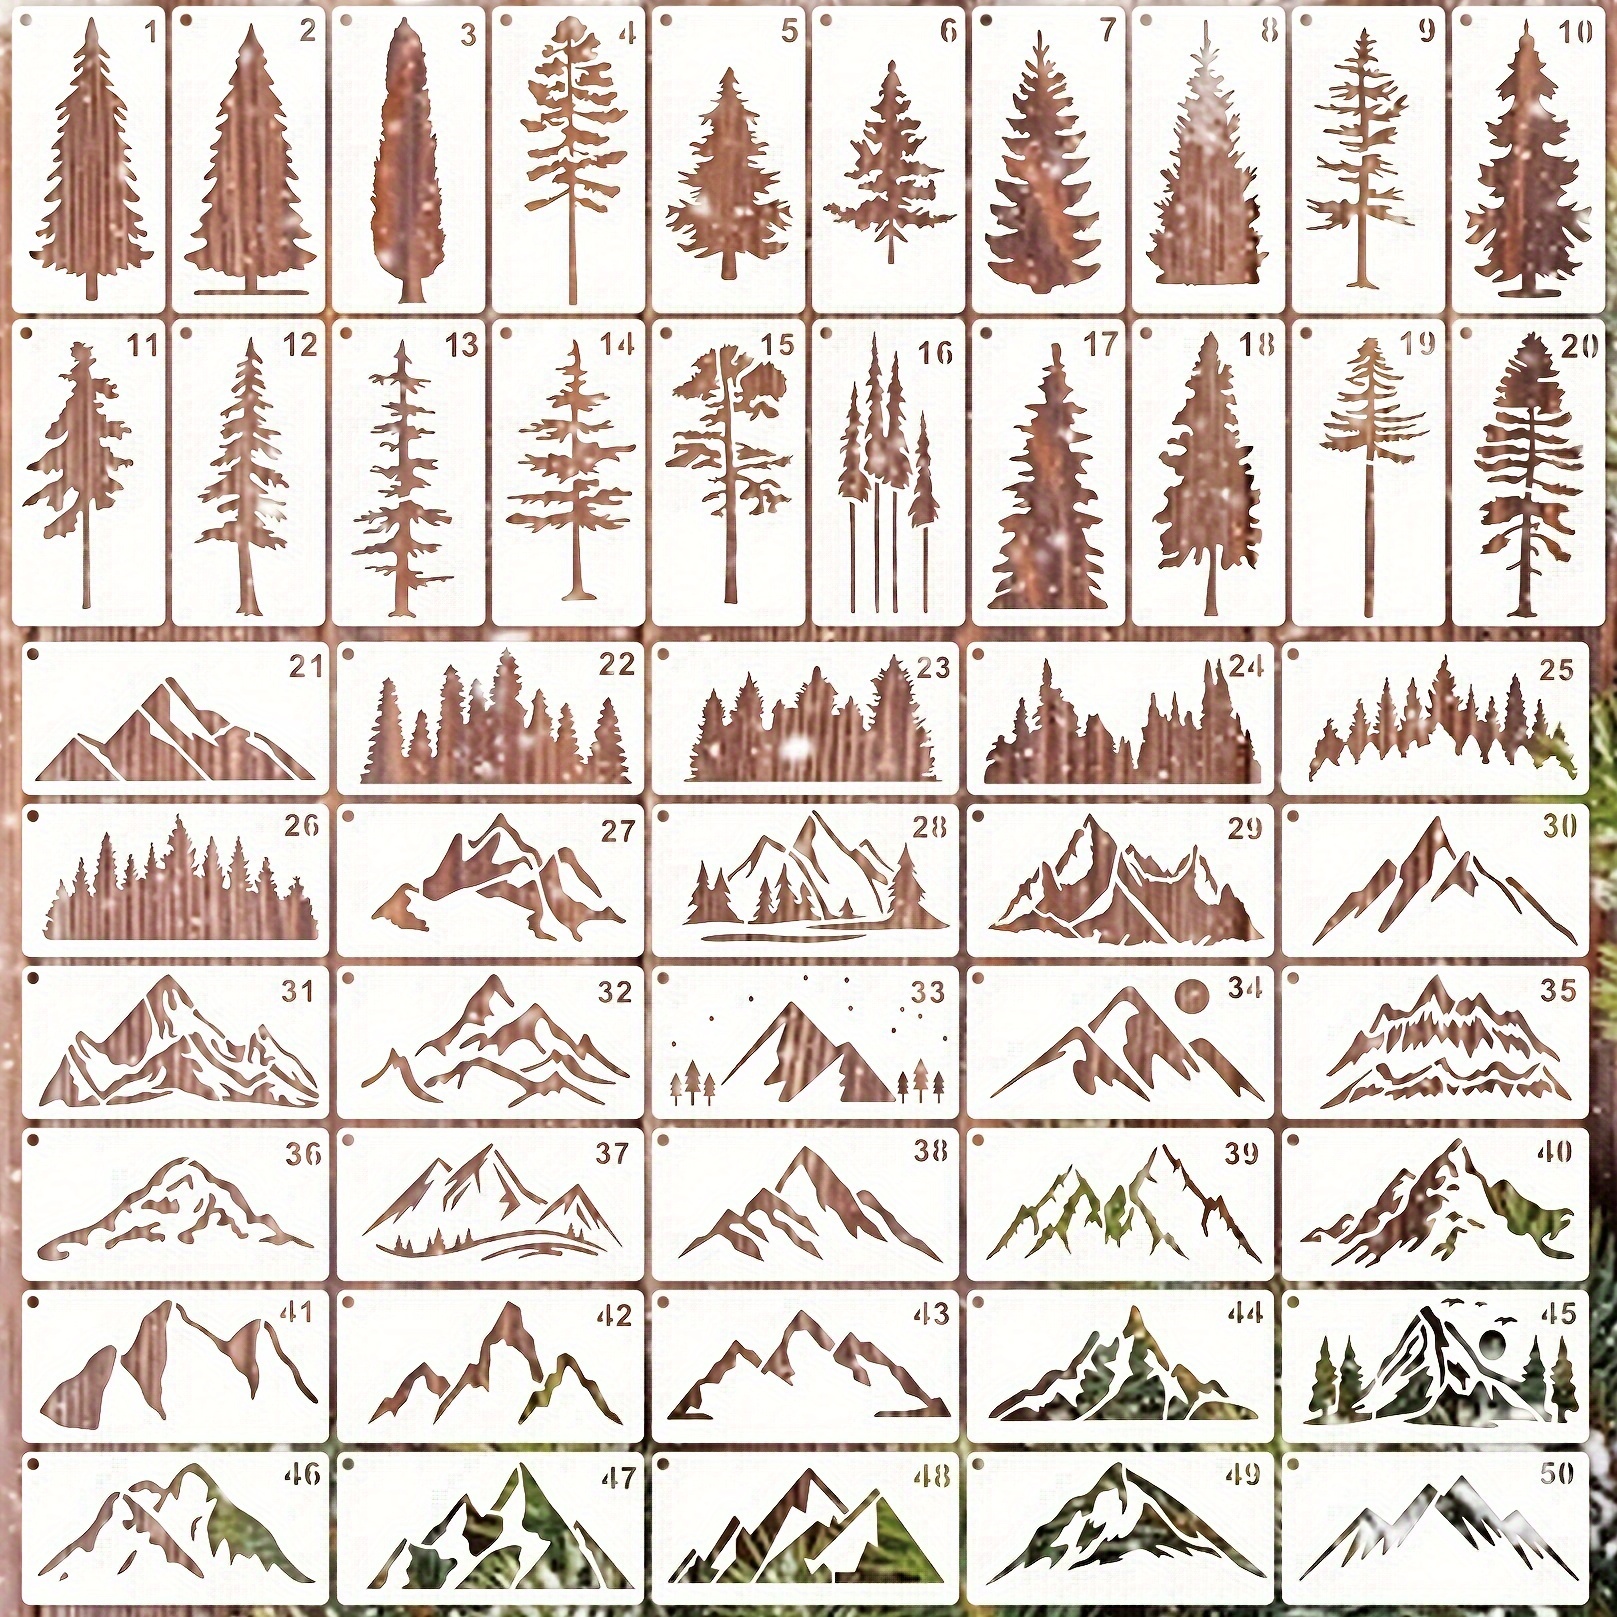 

50cpcs Pine Tree Tree Mountain Stencils For Painting Crafts Reusable Painting Pattern Templates For Diy Scrapbook Sign Shirt Canvas Wall Cookie Furniture Floor Decor